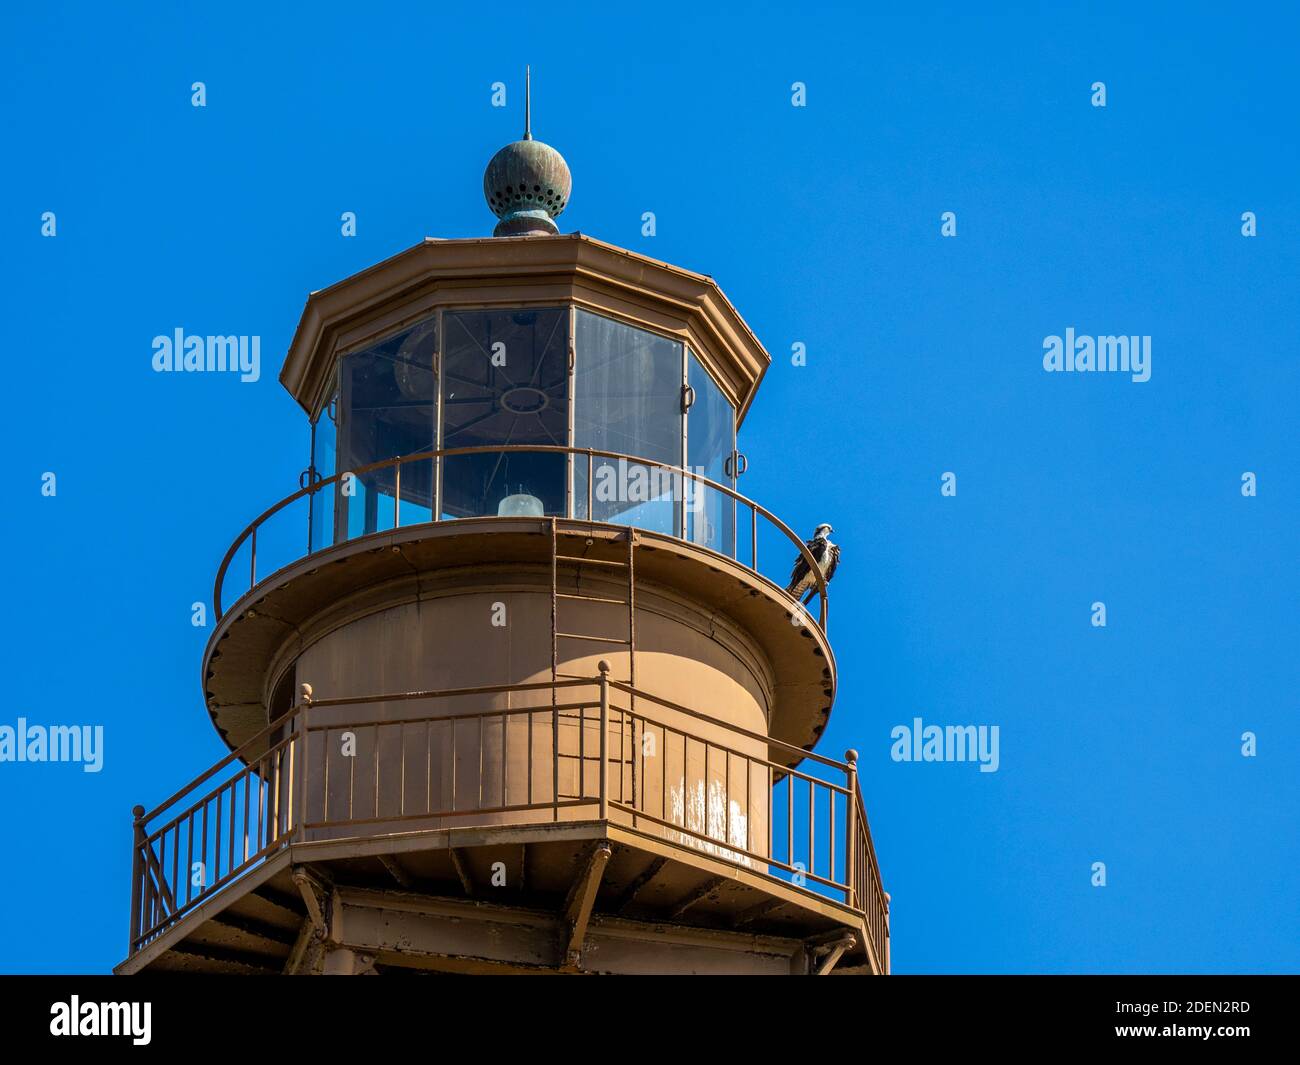 The Sanibel Island Light or Point Ybel Light on Sanibel Island on the Gulf of Mexico in southwest Florida in the Inited States Stock Photo